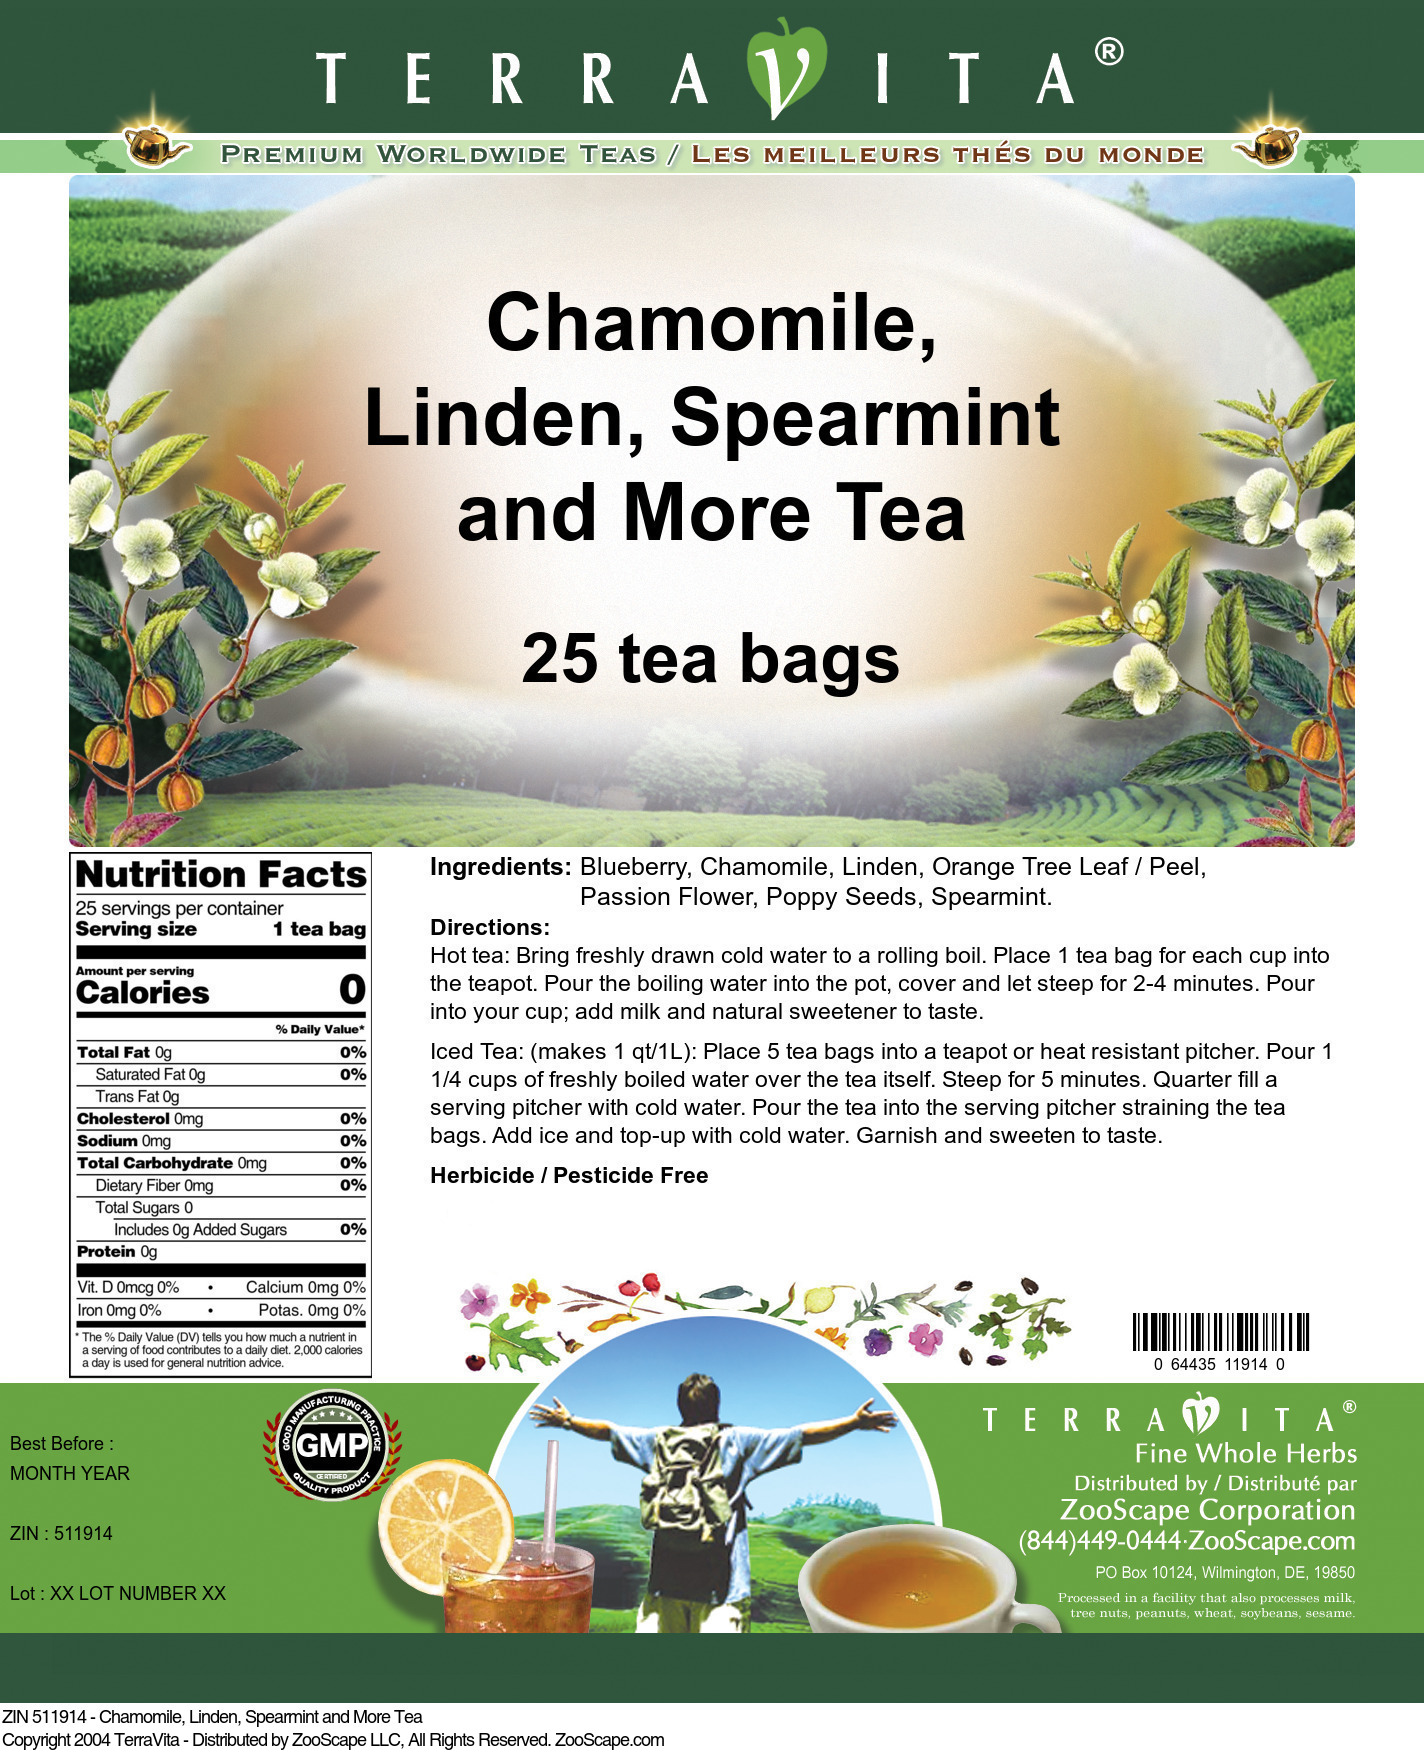 Chamomile, Linden, Spearmint and More Tea - Label